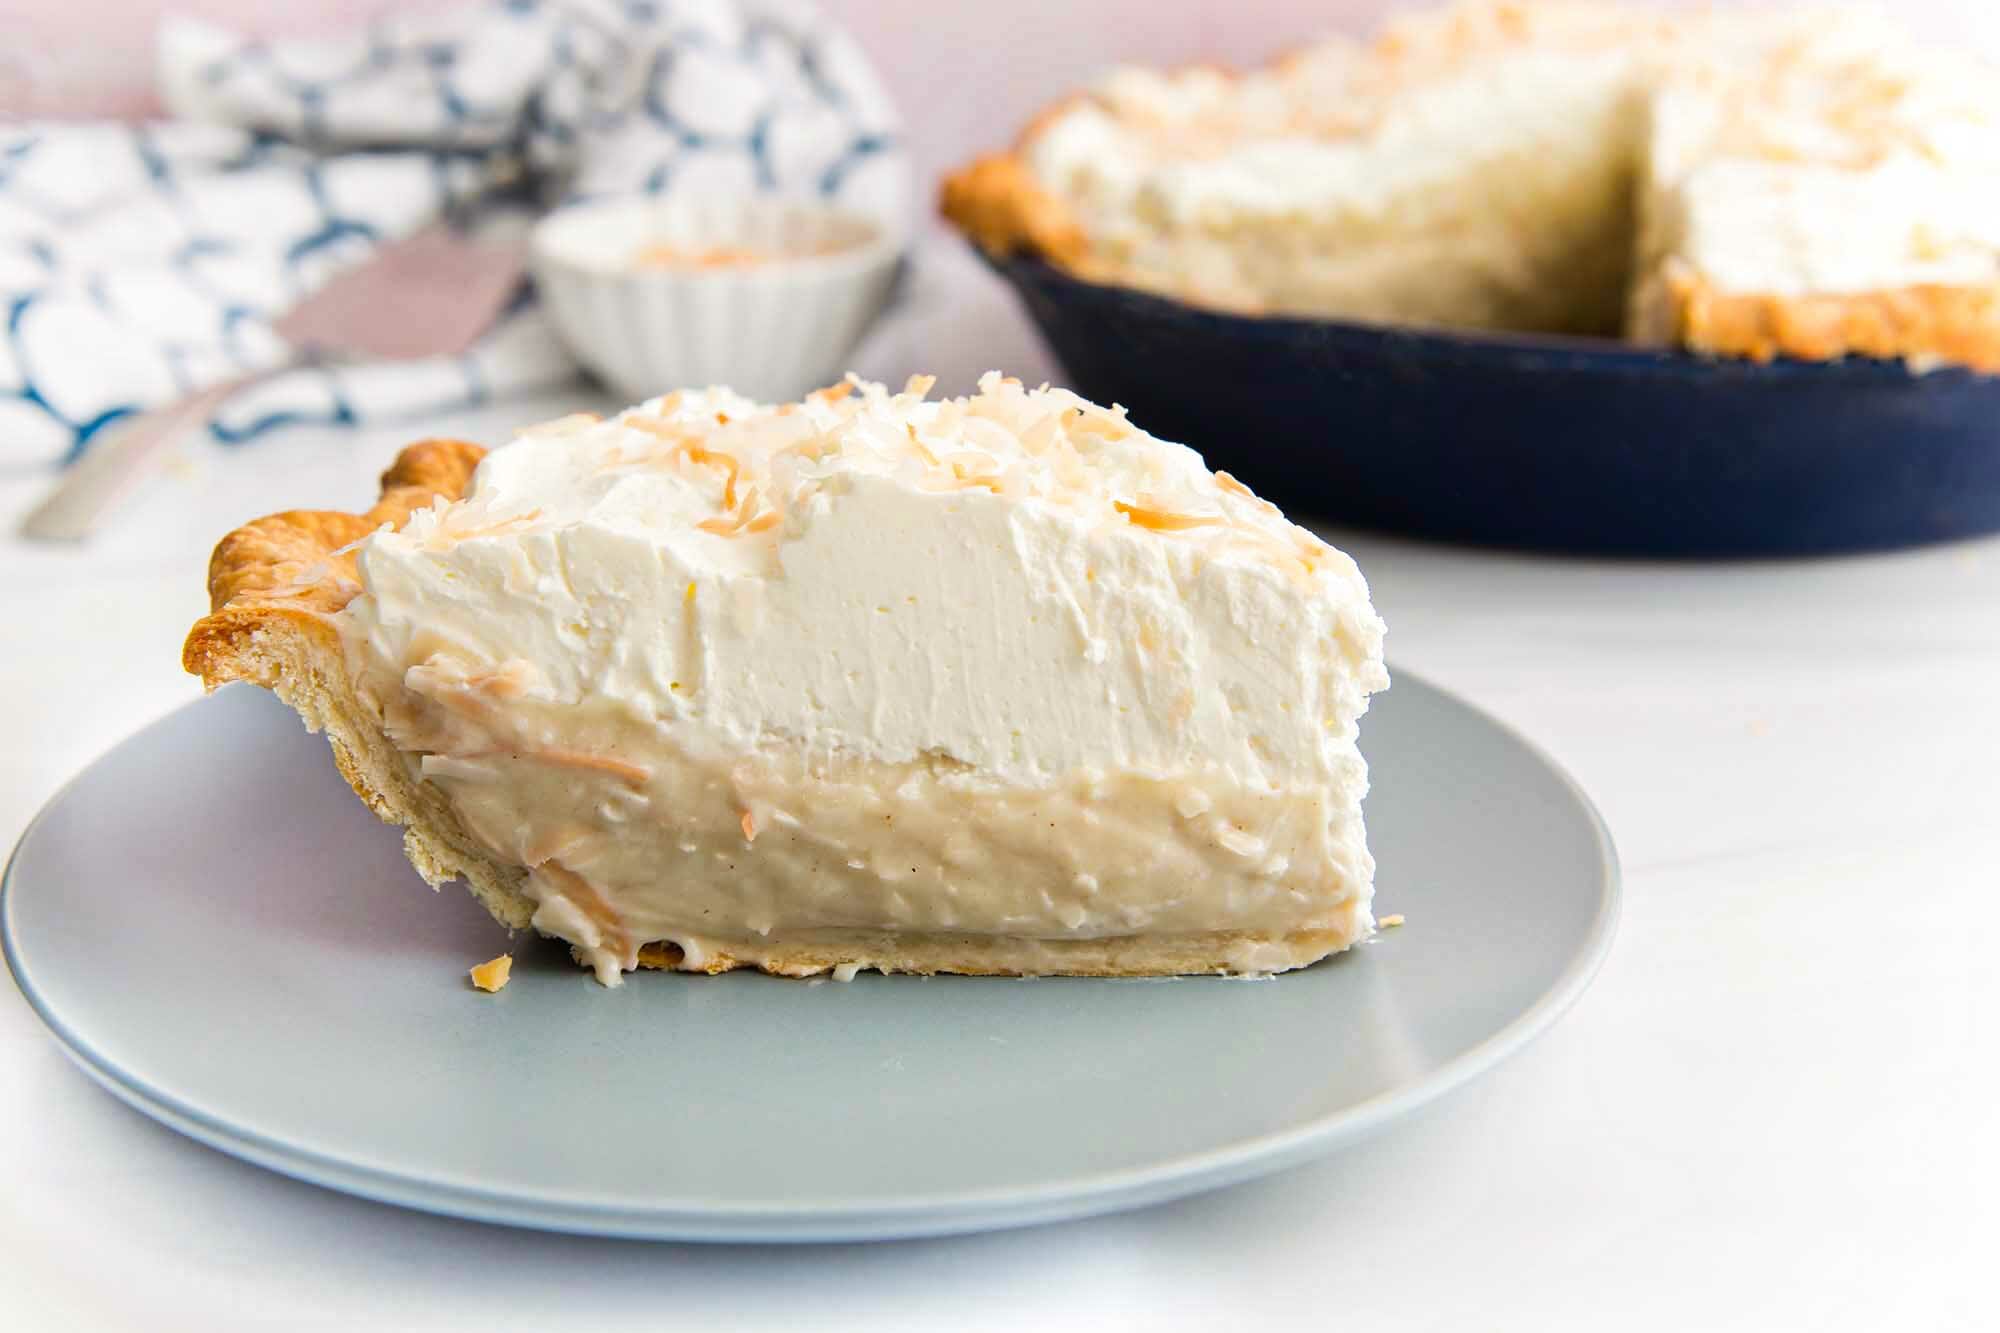 Side view of toasted coconut cream pie with a crisp crust, coconut filling and topped with a thick layer of whipping cream. The rest of the pie is visible behind the plate.